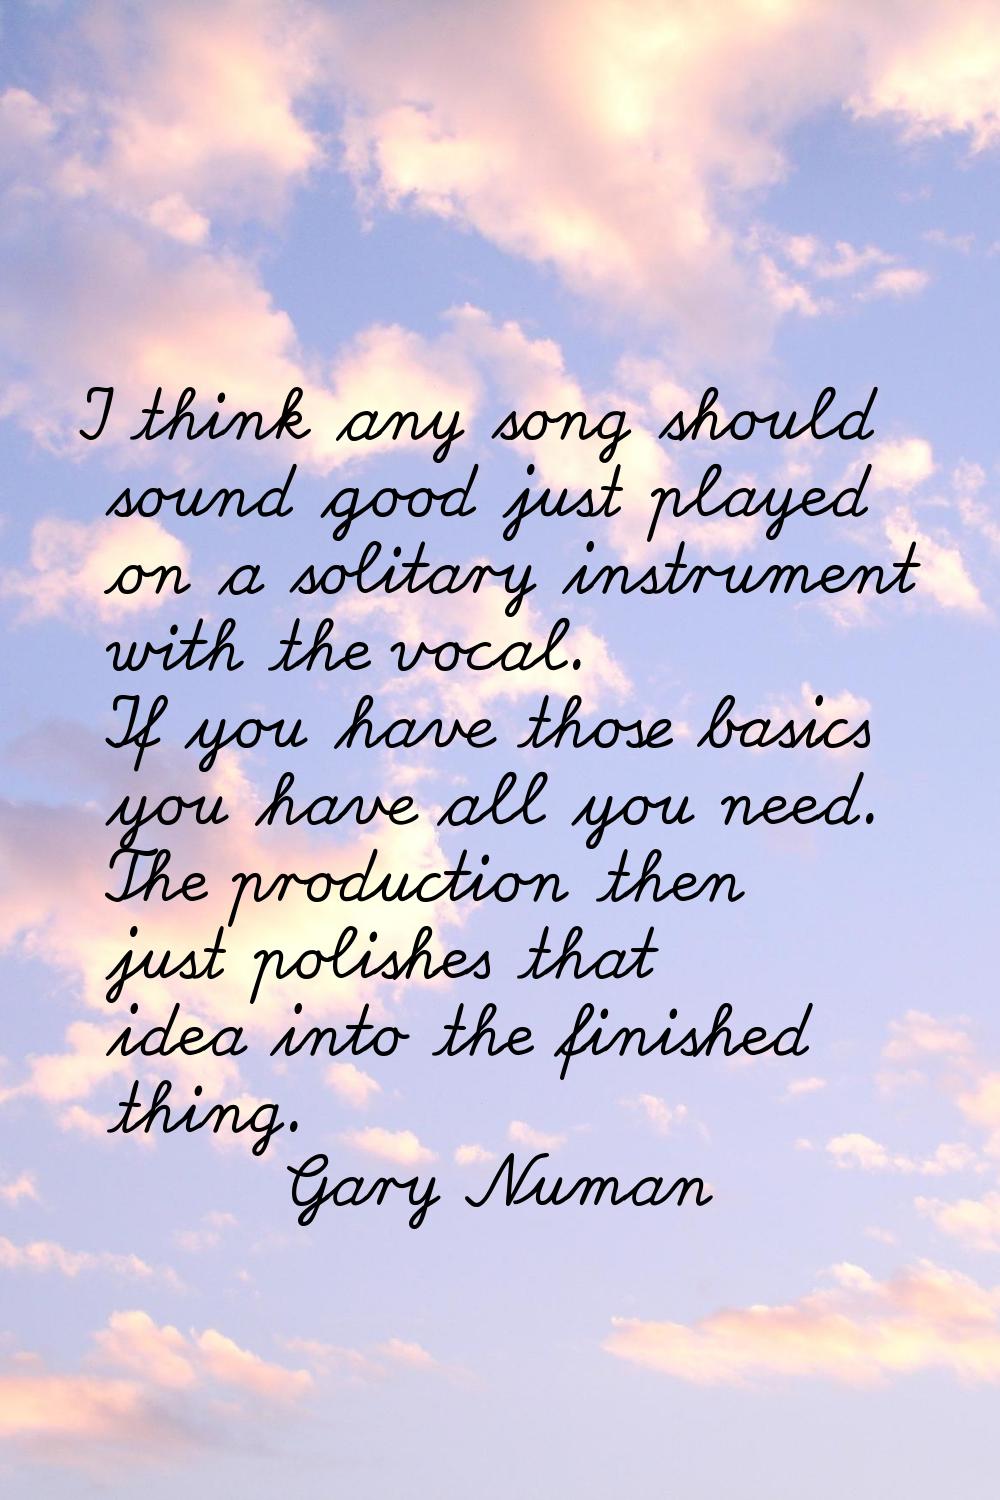 I think any song should sound good just played on a solitary instrument with the vocal. If you have